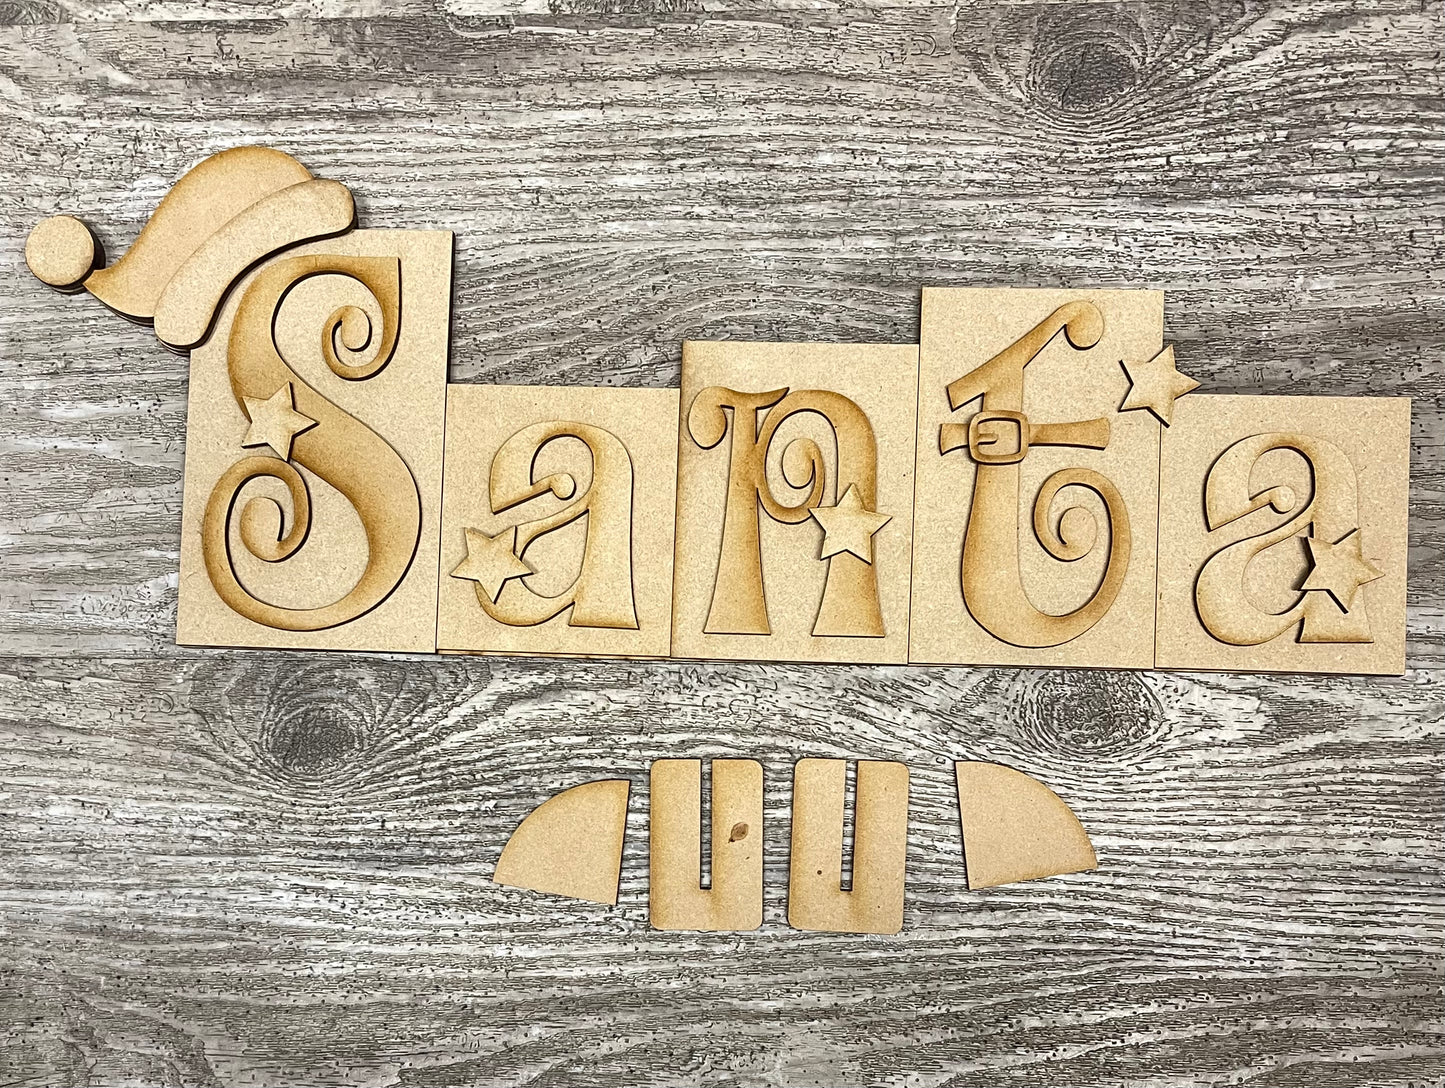 Santa word kit - wood pieces, unpainted wood cutouts, ready for you to paint, scrapbook paper is not included